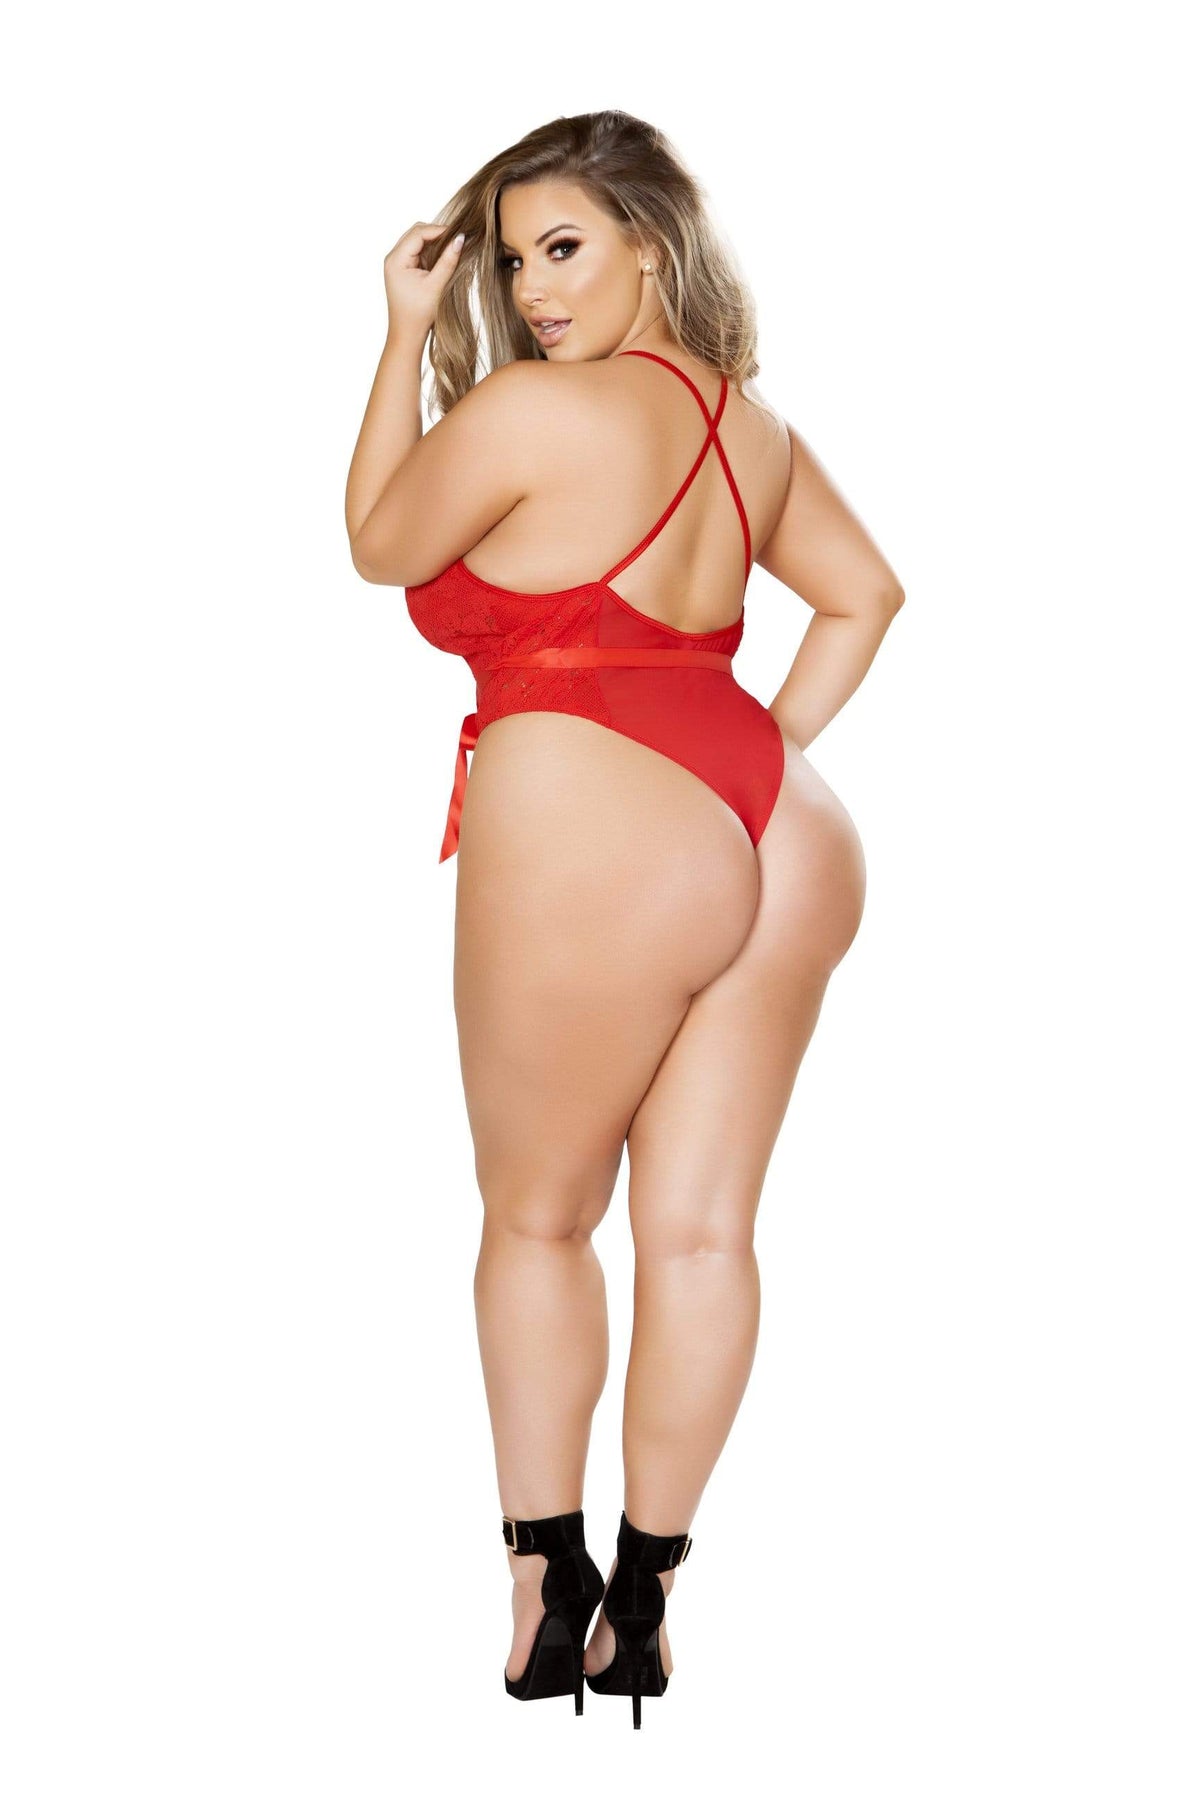 Roma Red Sheer Bow Criss Cross Bow Teddy (Black or Blue also available) Apparel &amp; Accessories &gt; Clothing &gt; Underwear &amp; Socks &gt; Lingerie